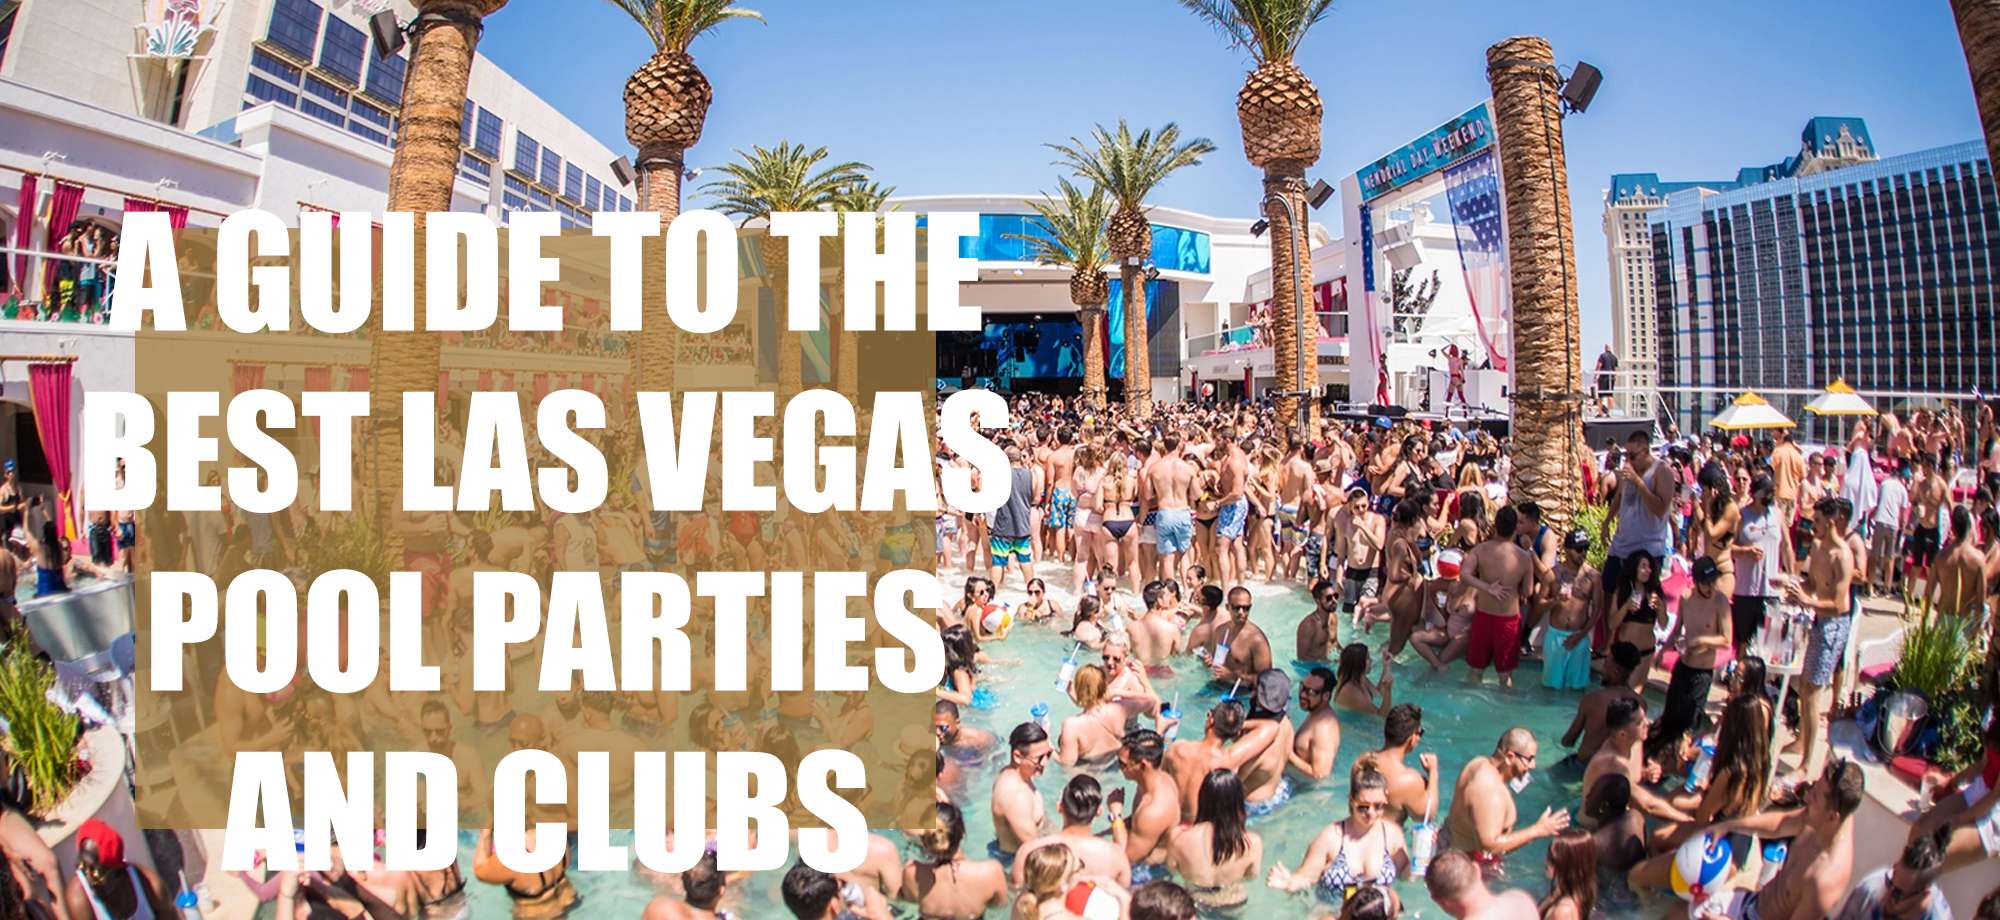 Your guide to the pool clubs of Las Vegas - Las Vegas Weekly